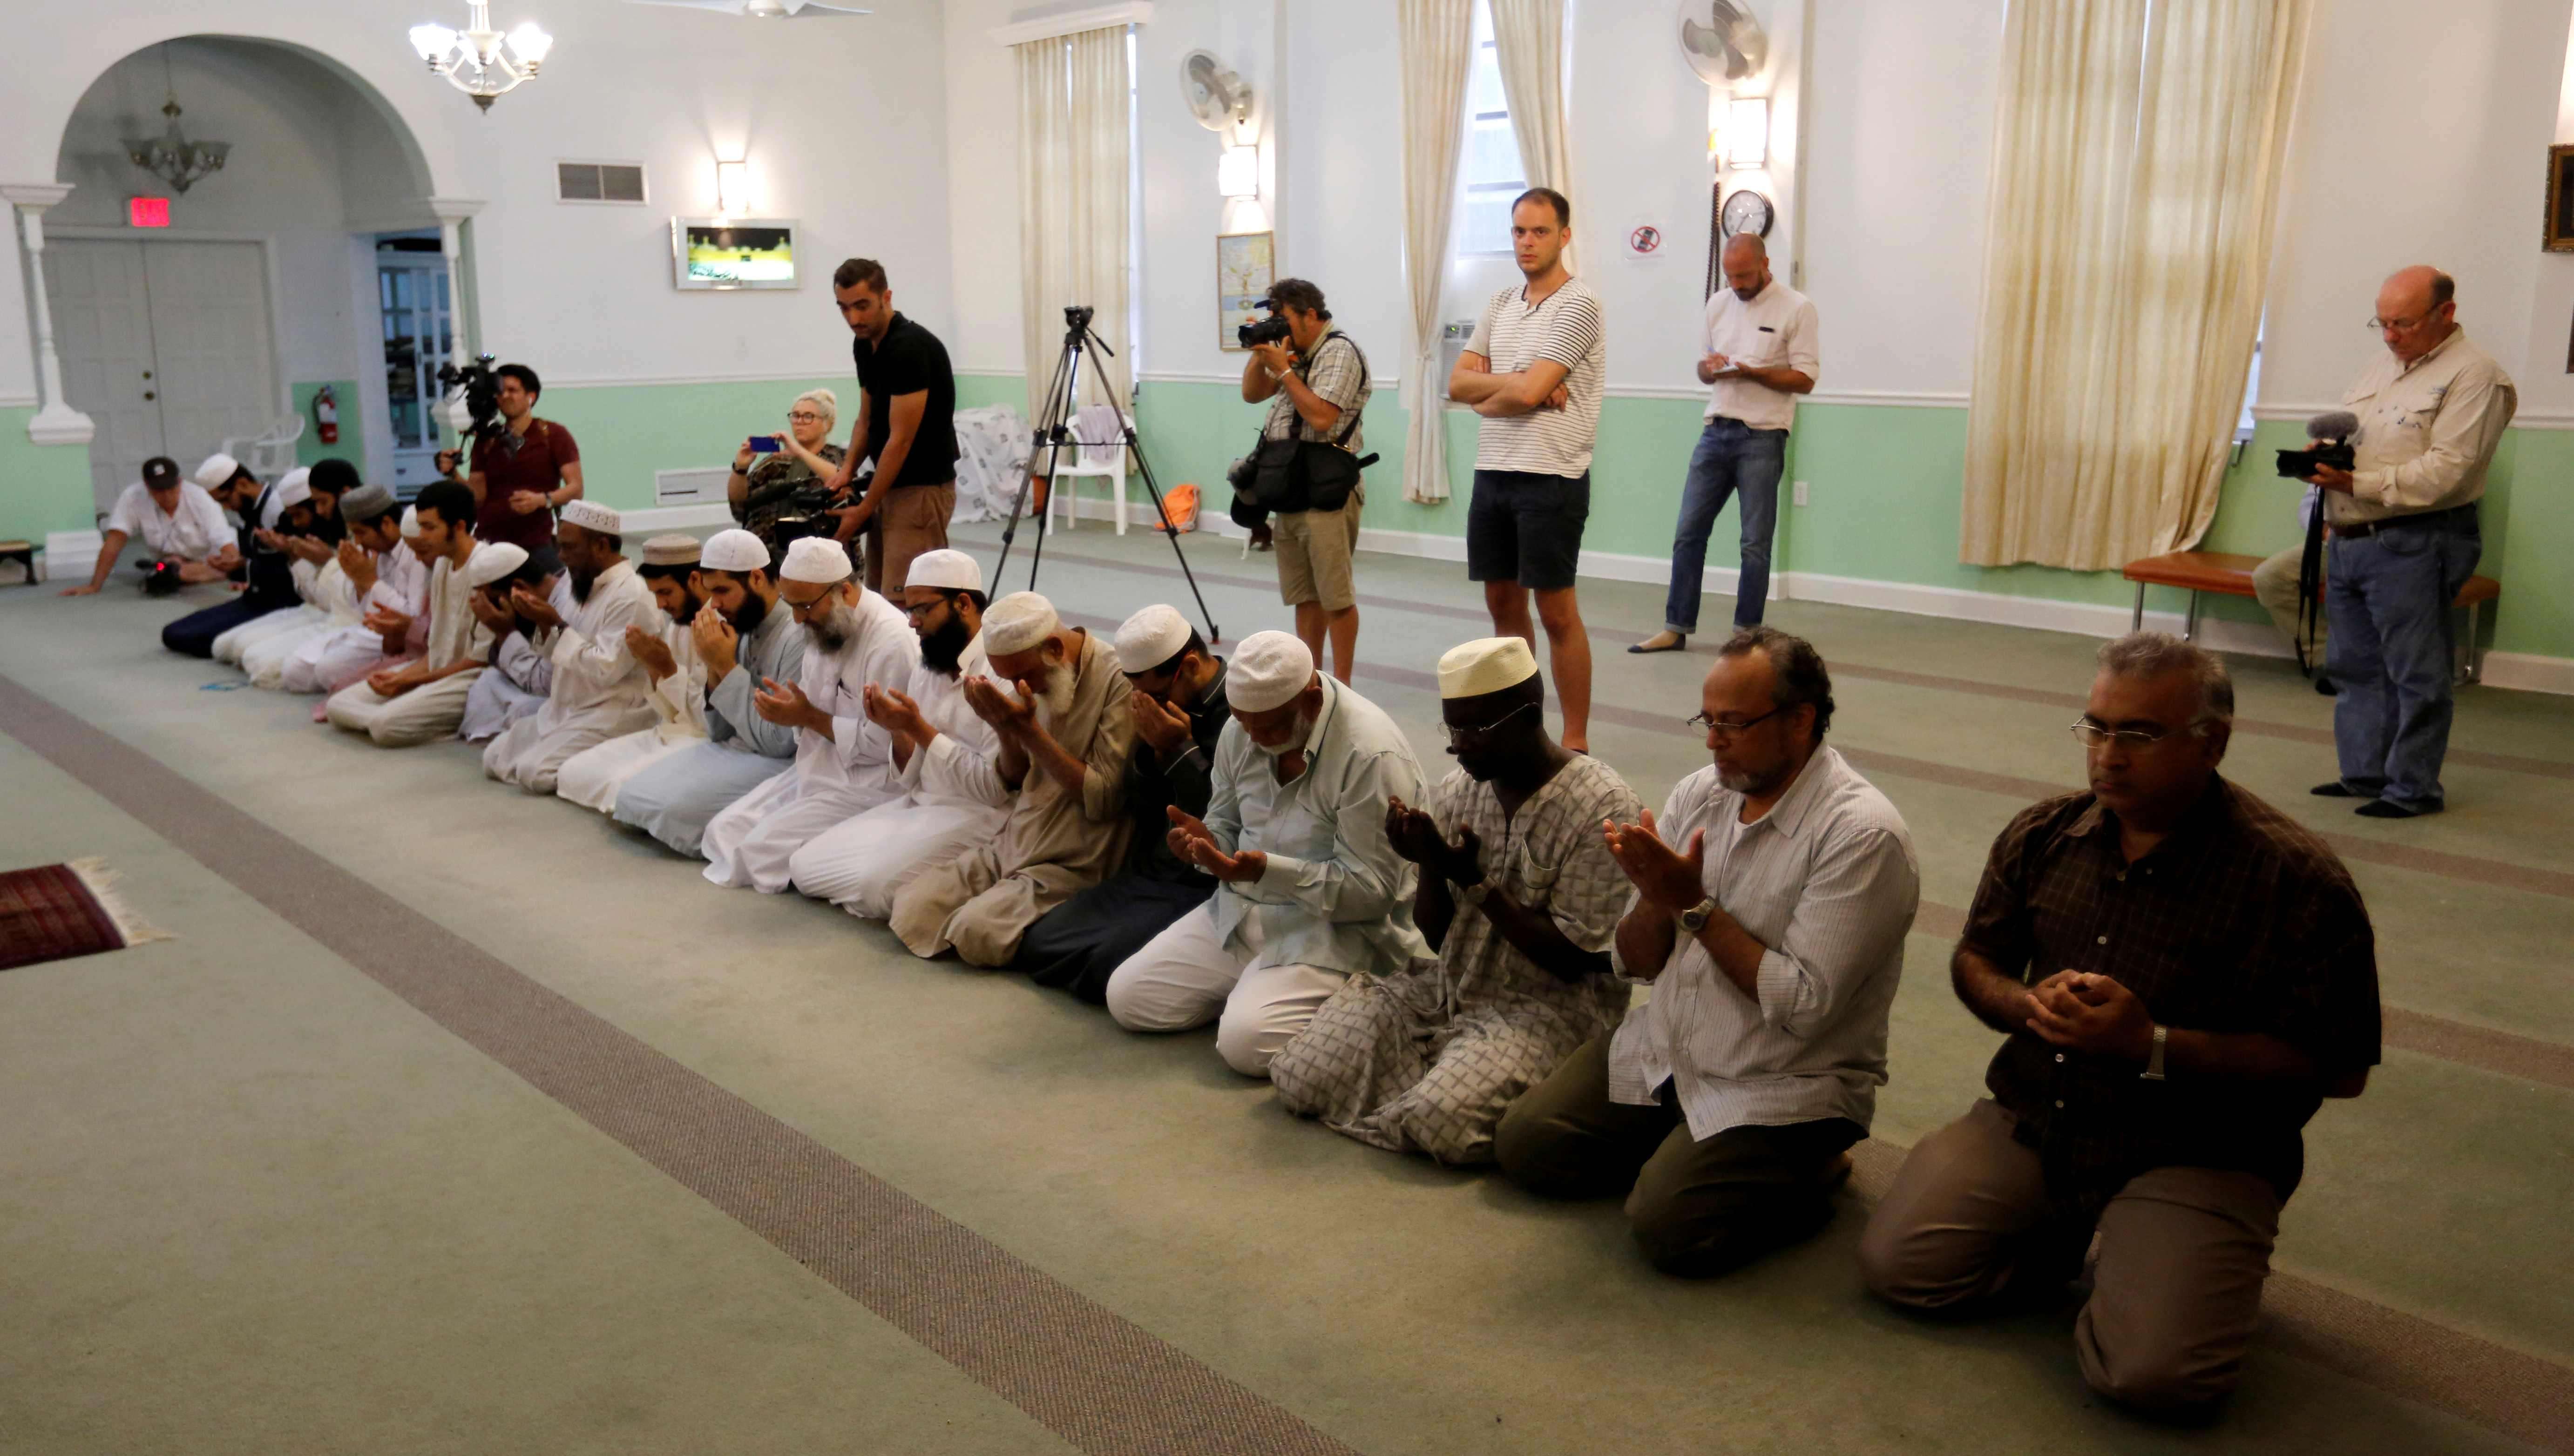 Worshippers listen as Imam Syed Shafeeq Rahman of the Islamic Centre of Fort Pierce offers a prayer for victims of the Orlando shooting, in Fort Pierce on Sunday. Photo: Reuters